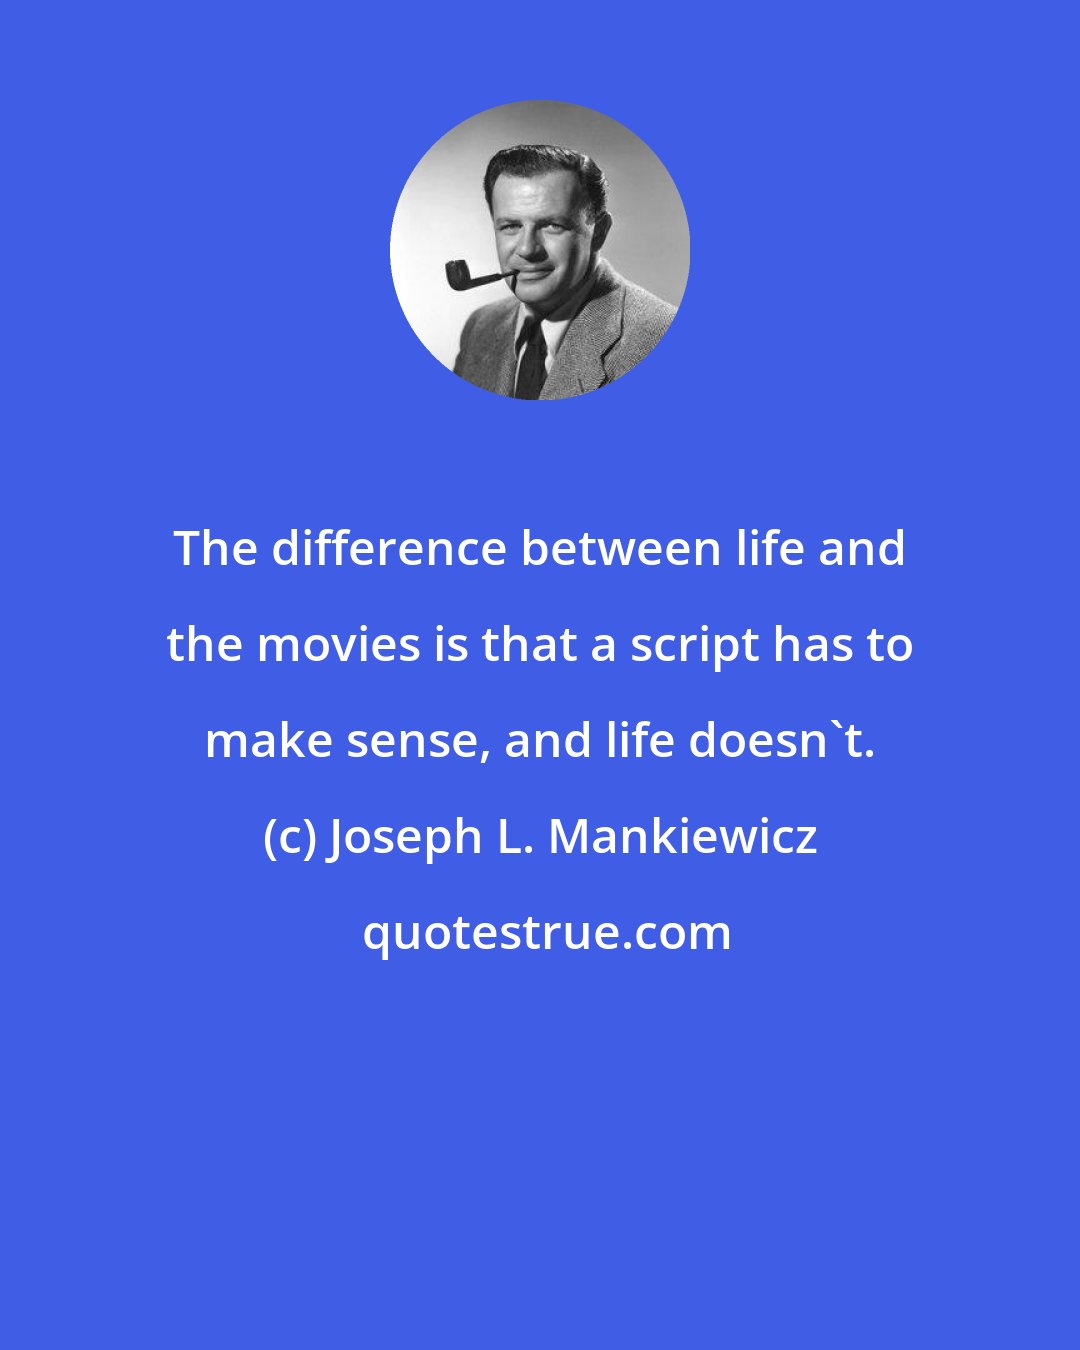 Joseph L. Mankiewicz: The difference between life and the movies is that a script has to make sense, and life doesn't.